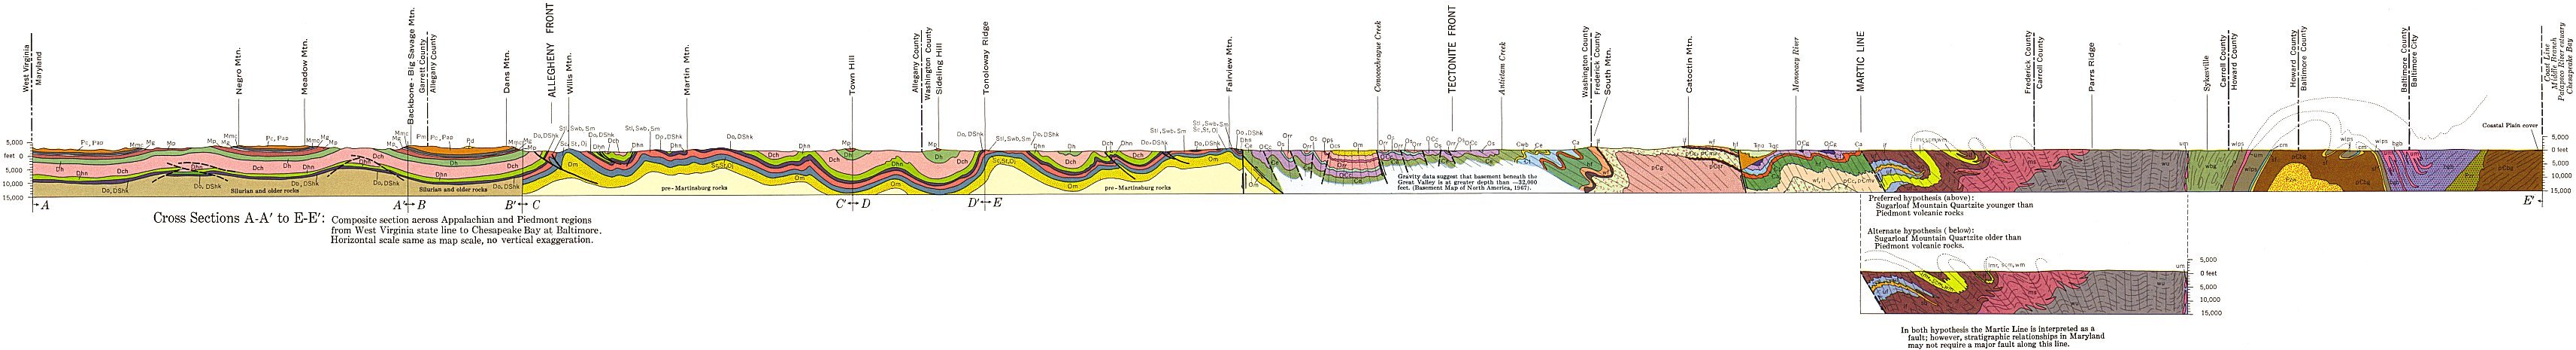 Geologic Cross Section of the Appalachian and Piedmont Regions (1968) 